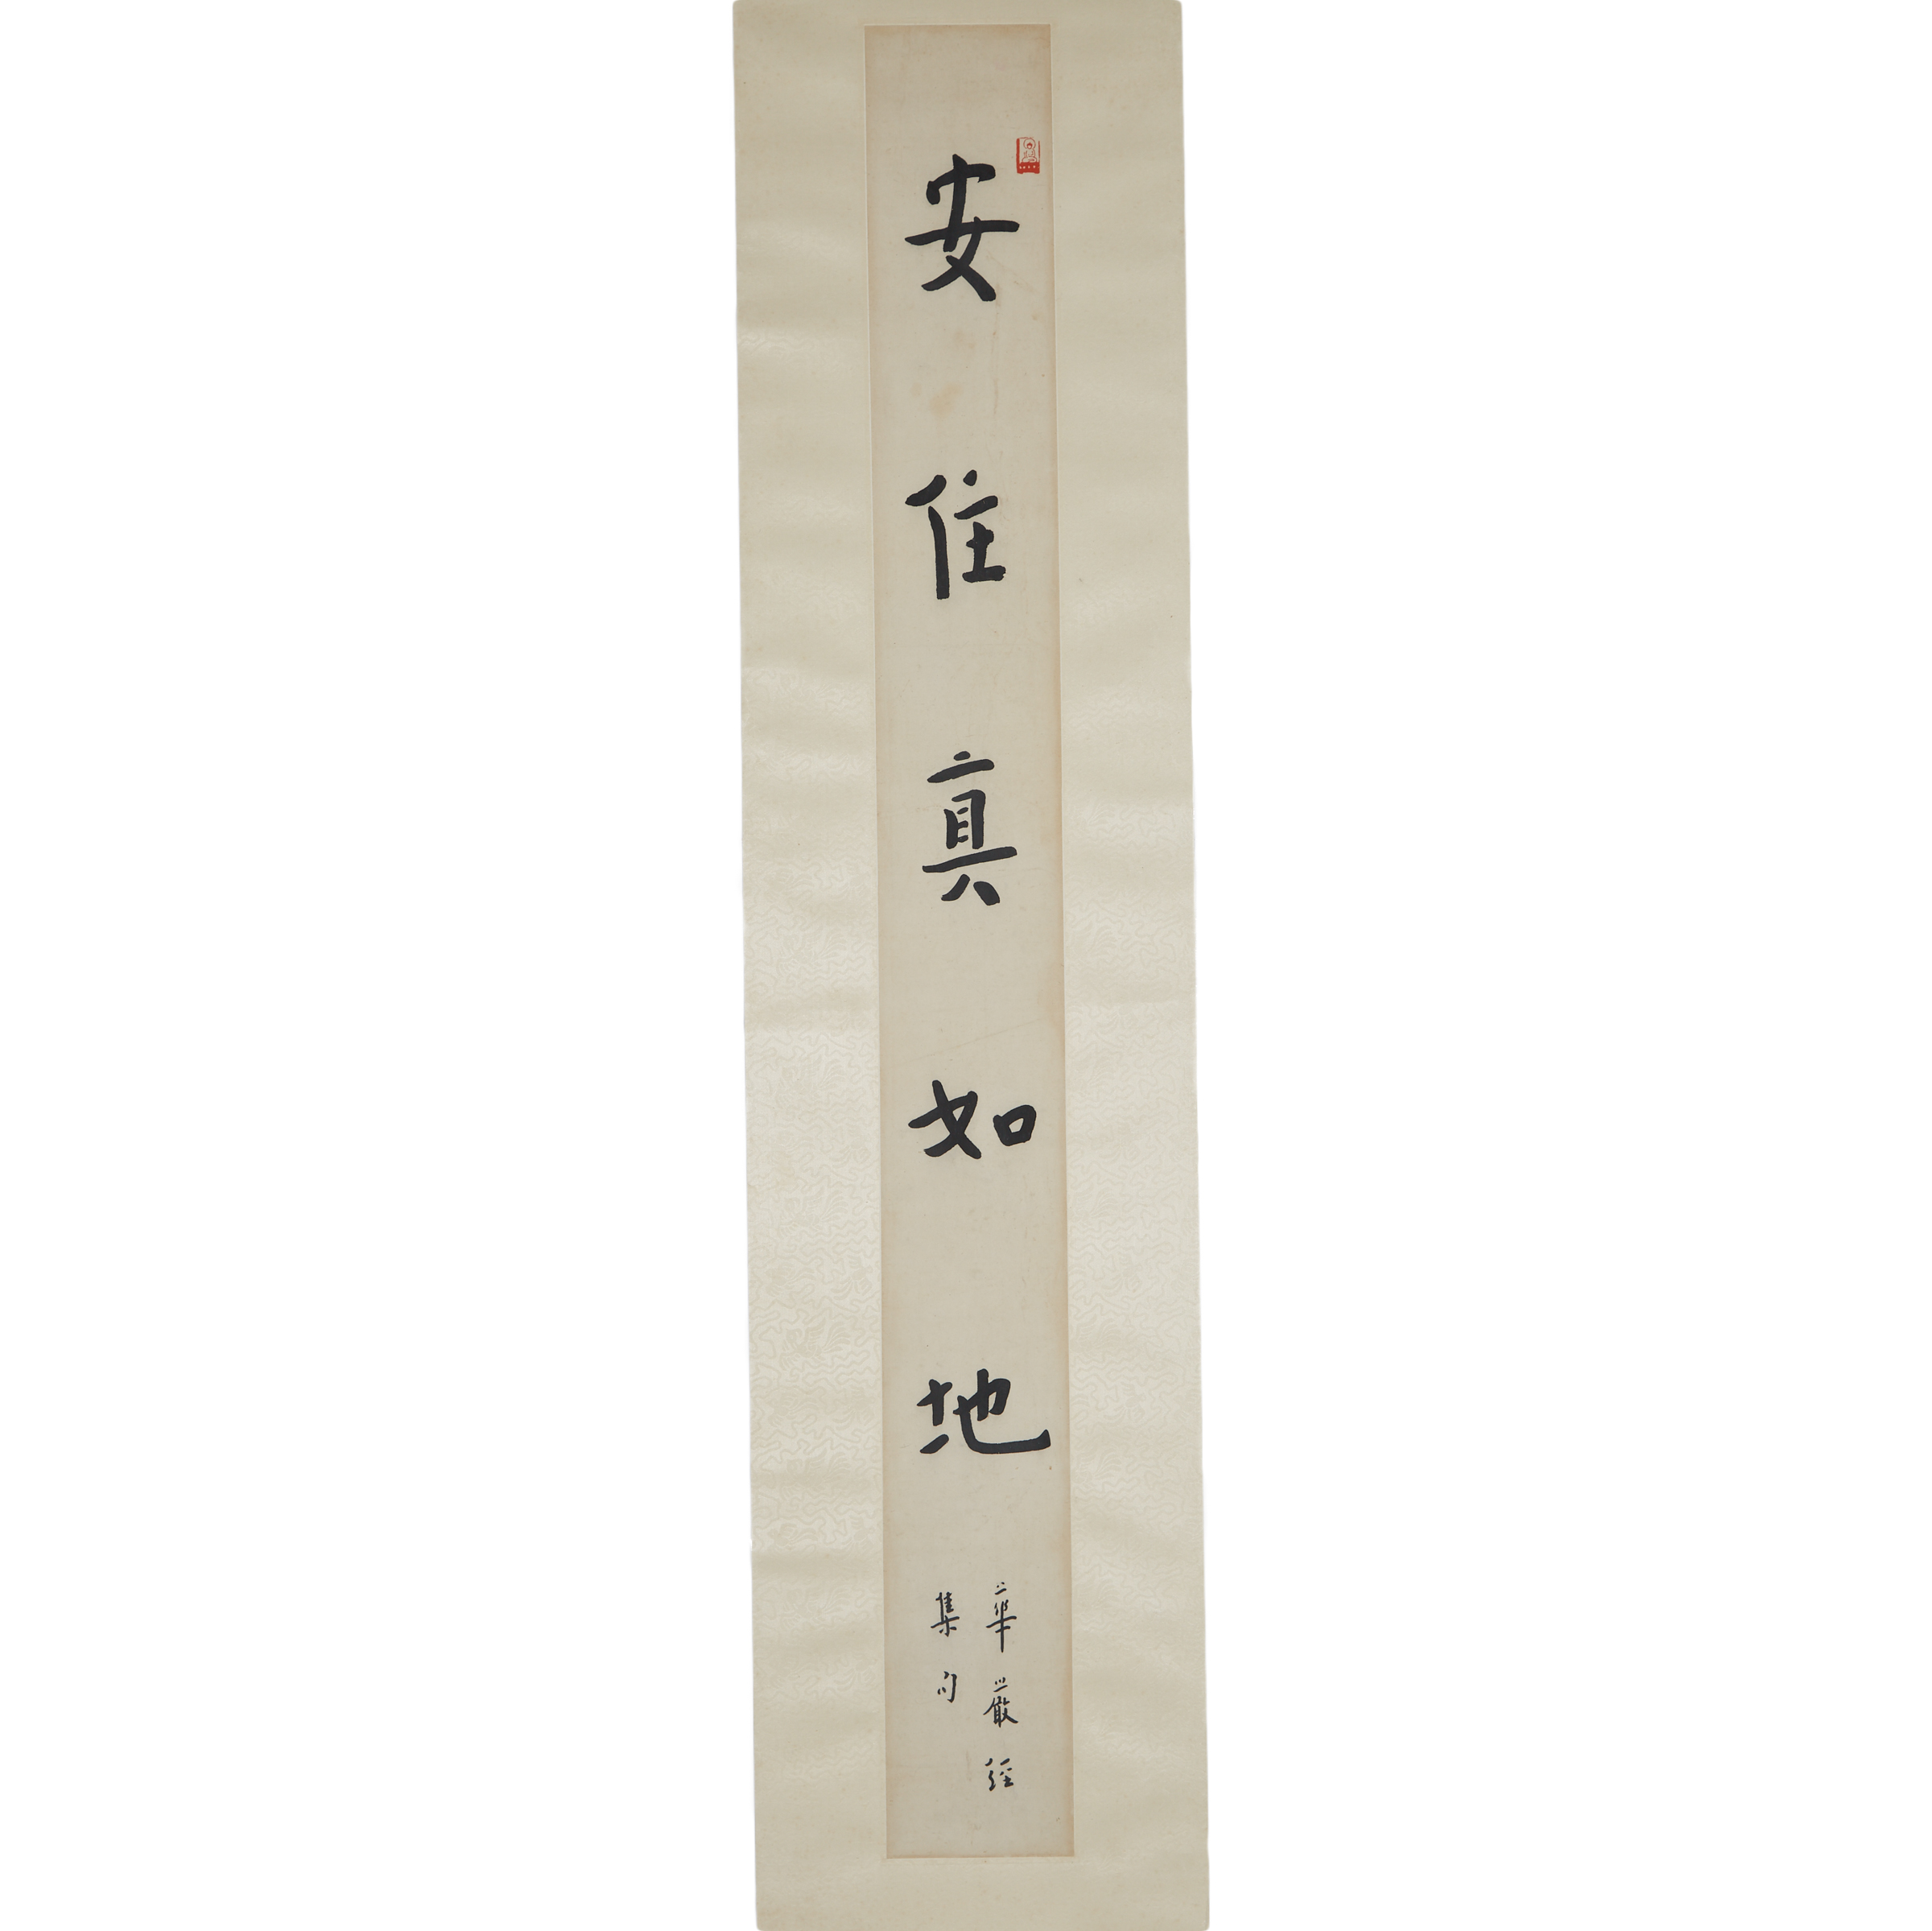 After Hong Yi (1880-1942), Calligraphy Couplet